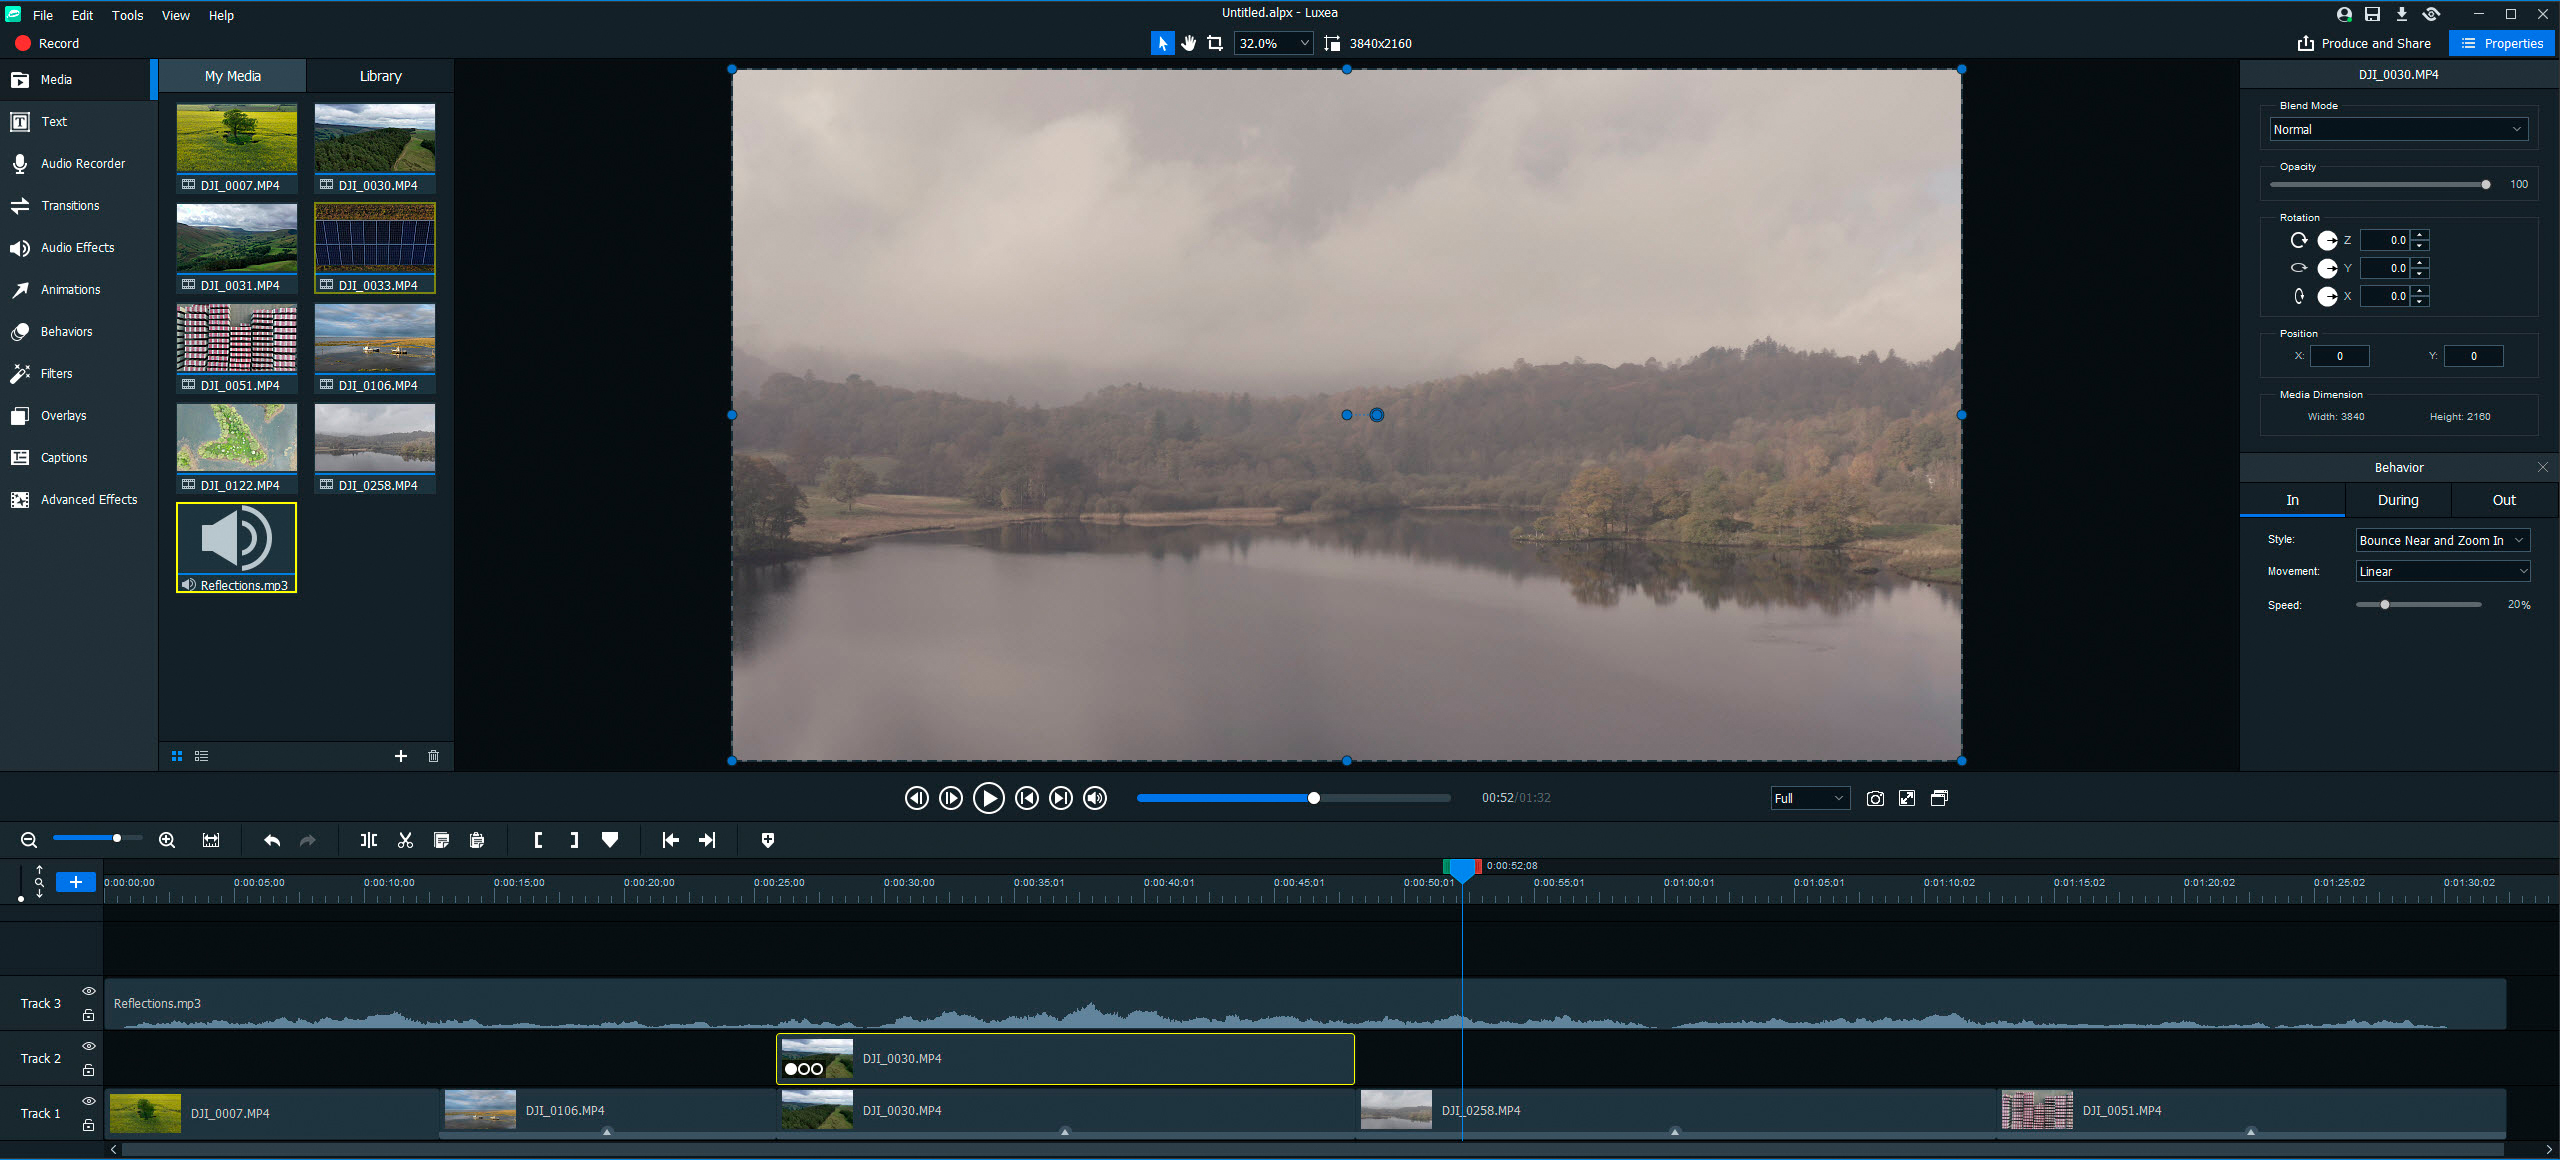 ACDSee Luxea Video Editor 7.1.3.2421 free instals